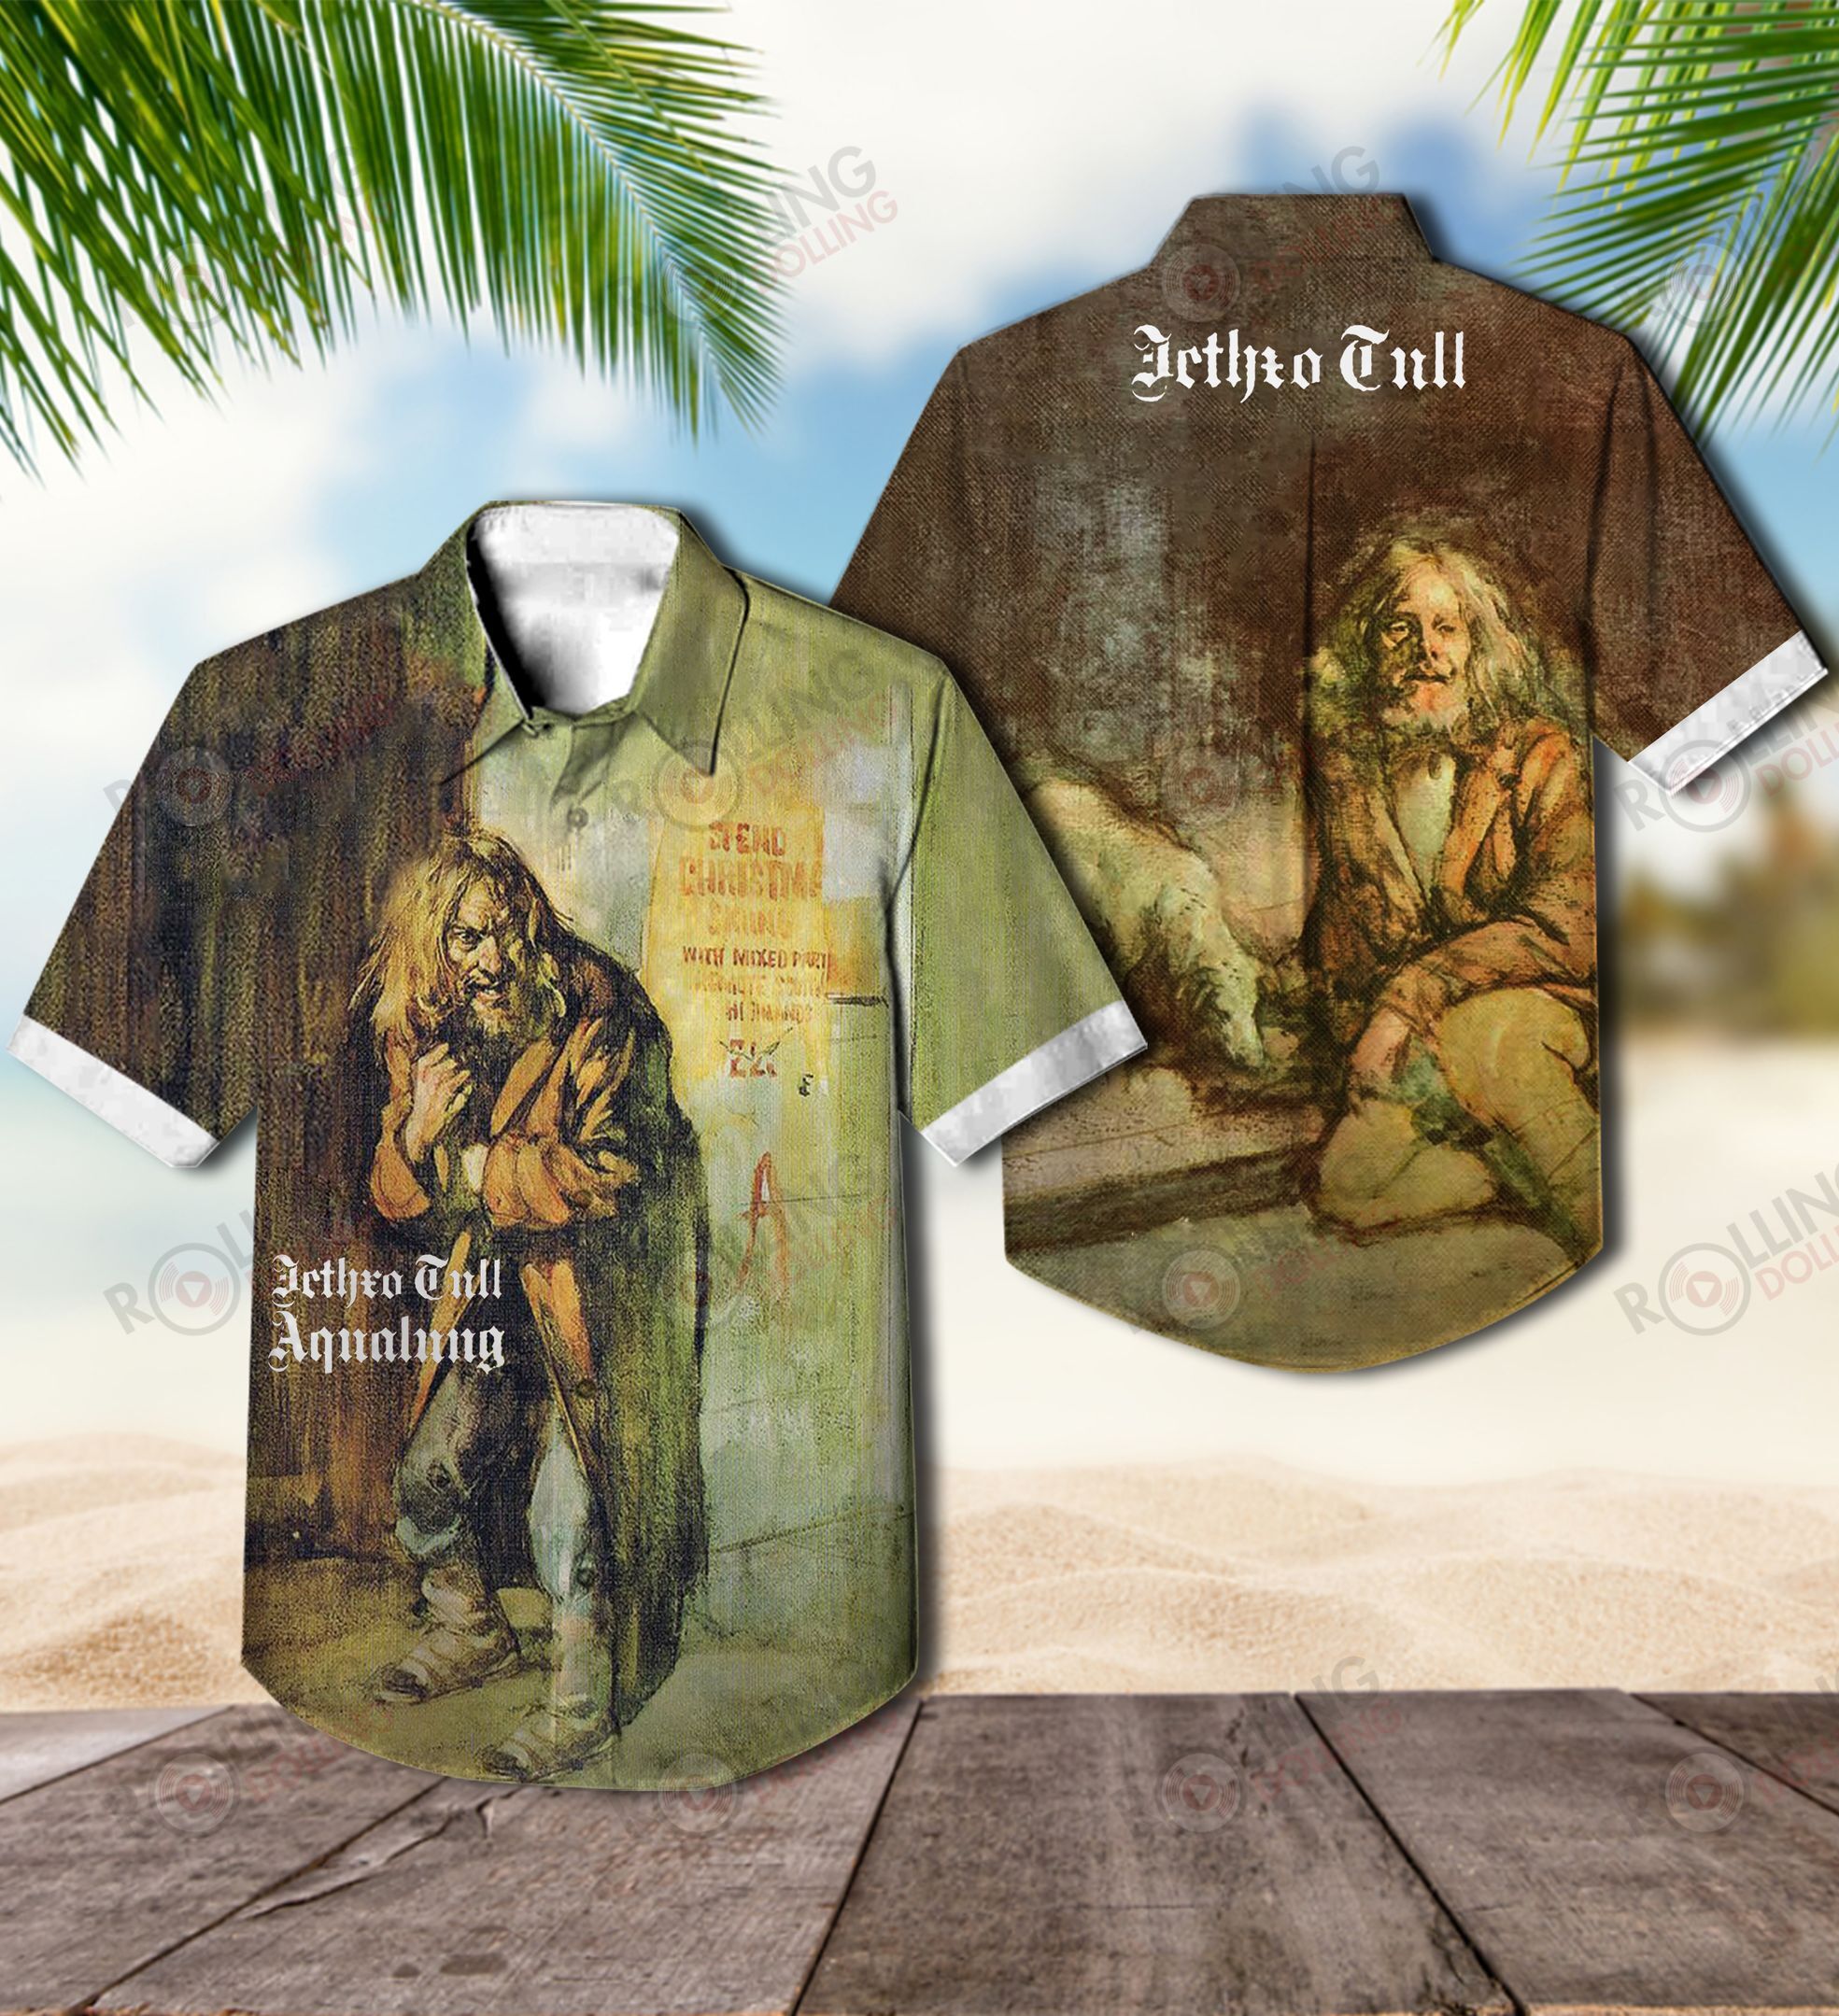 This would make a great gift for any fan who loves Hawaiian Shirt as well as Rock band 64